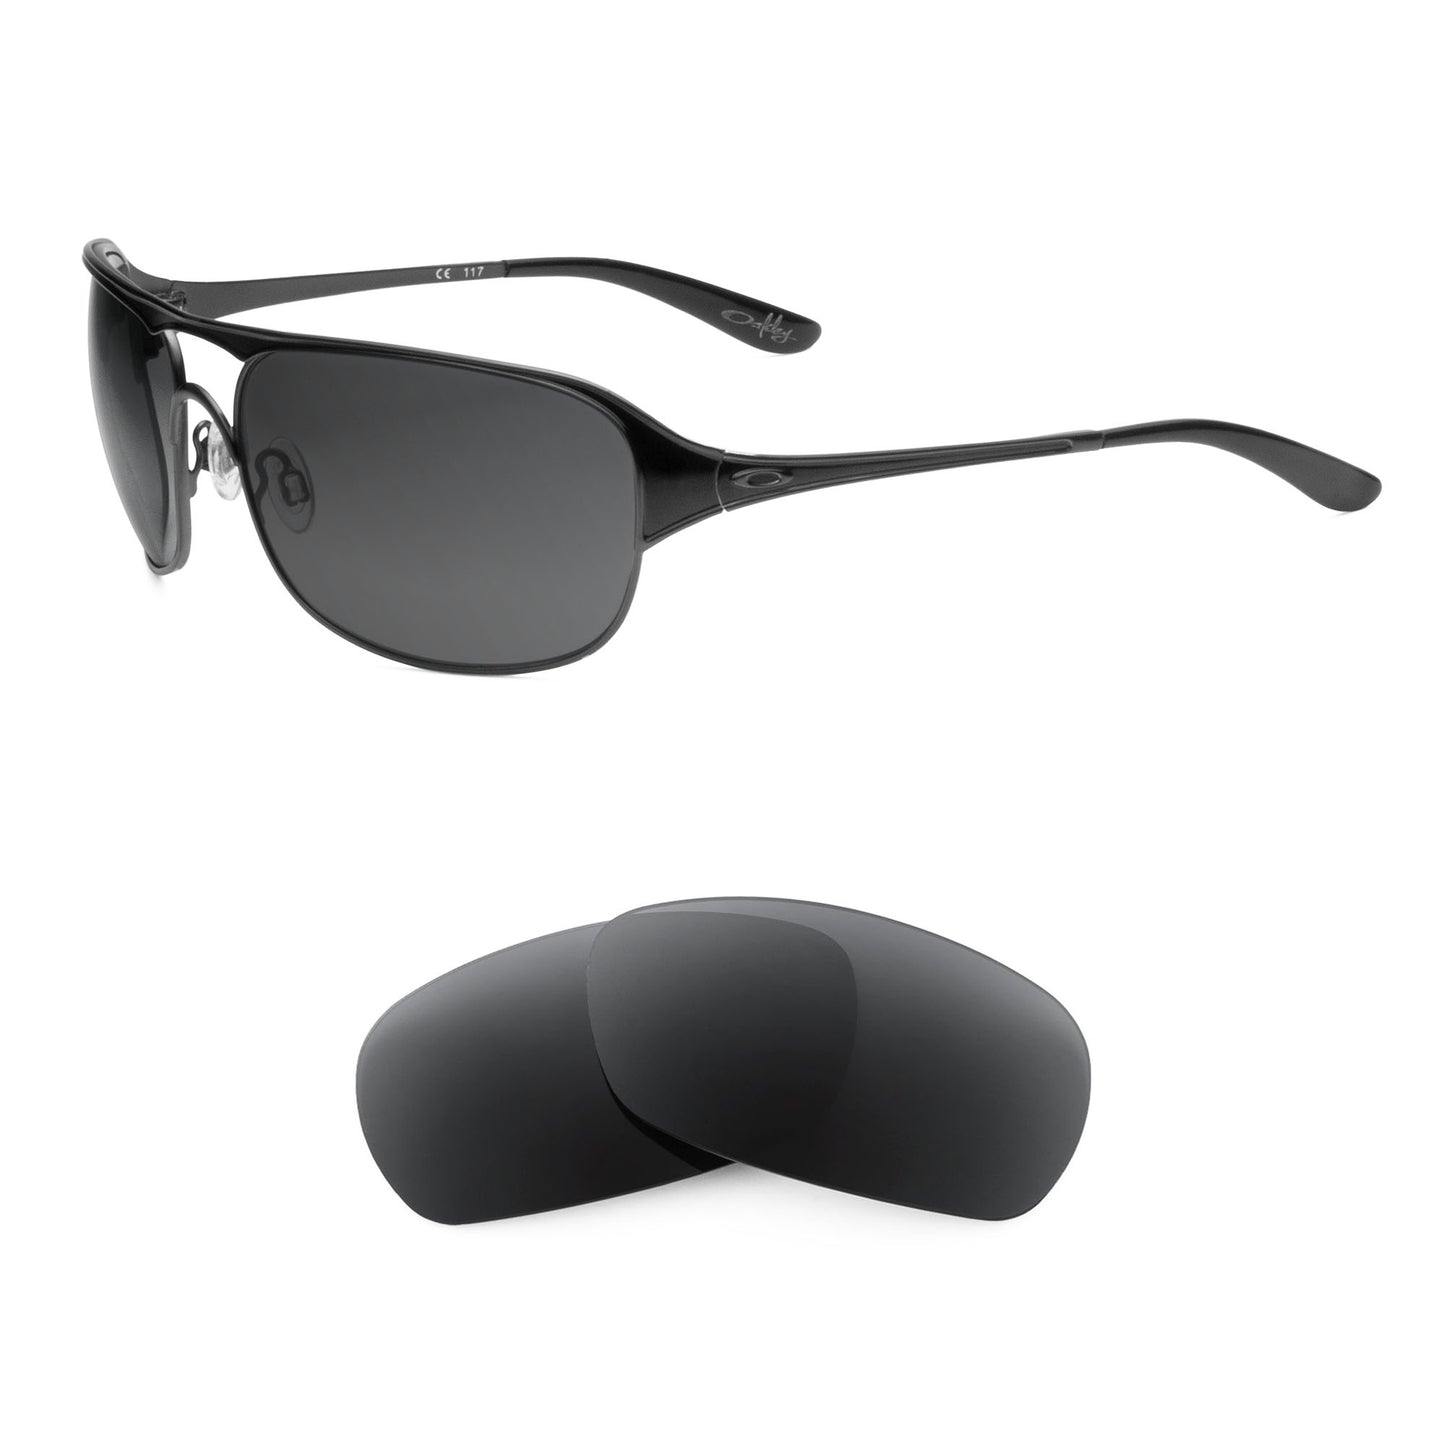 Oakley Cover Story sunglasses with replacement lenses